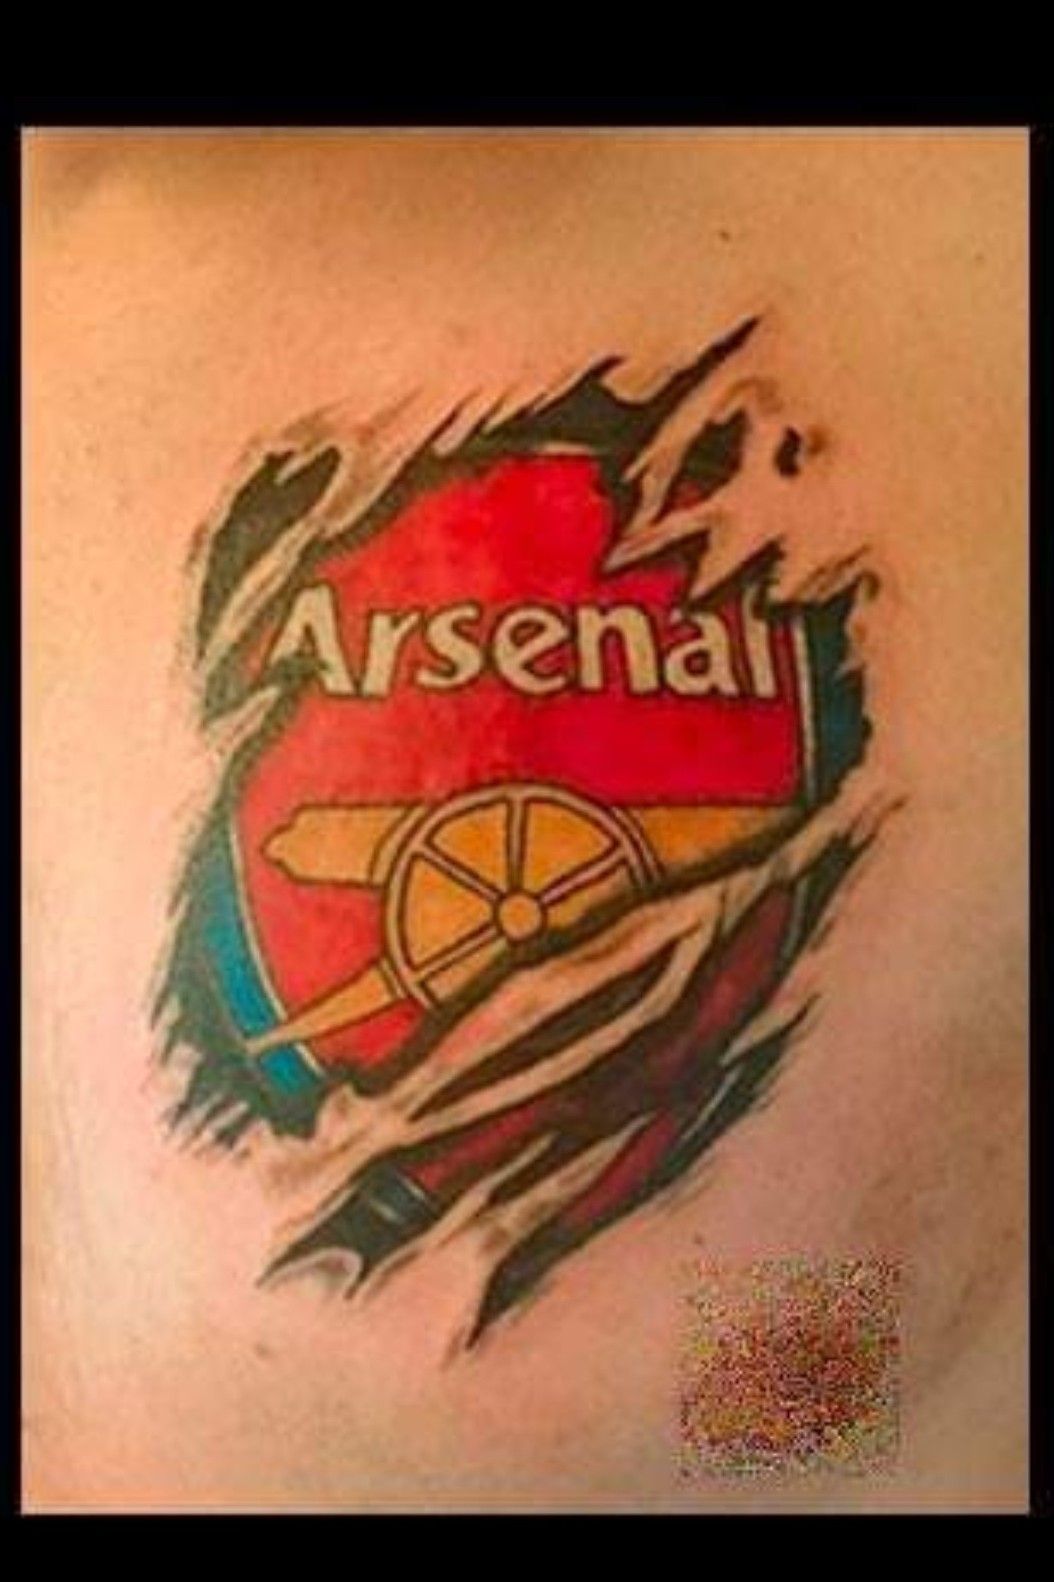 Arsenal fan gets bizarre tattoo of Arsene Wenger riding a dog while  celebrating 1998 double win  London Evening Standard  Evening Standard